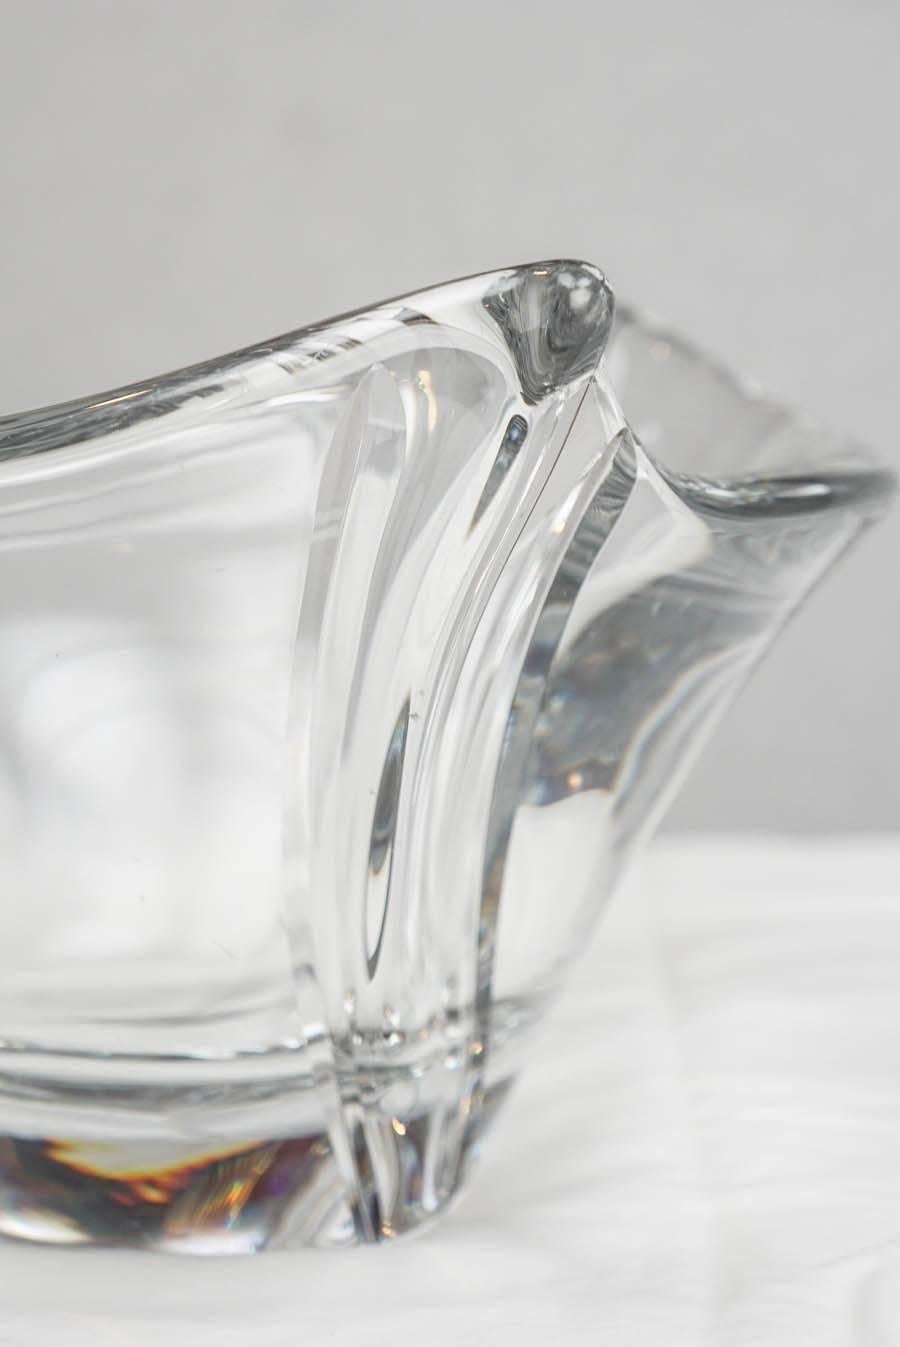 Elegant Daum Crystal Bowl, Modern/Transitional Style In Good Condition For Sale In Lakeville, CT